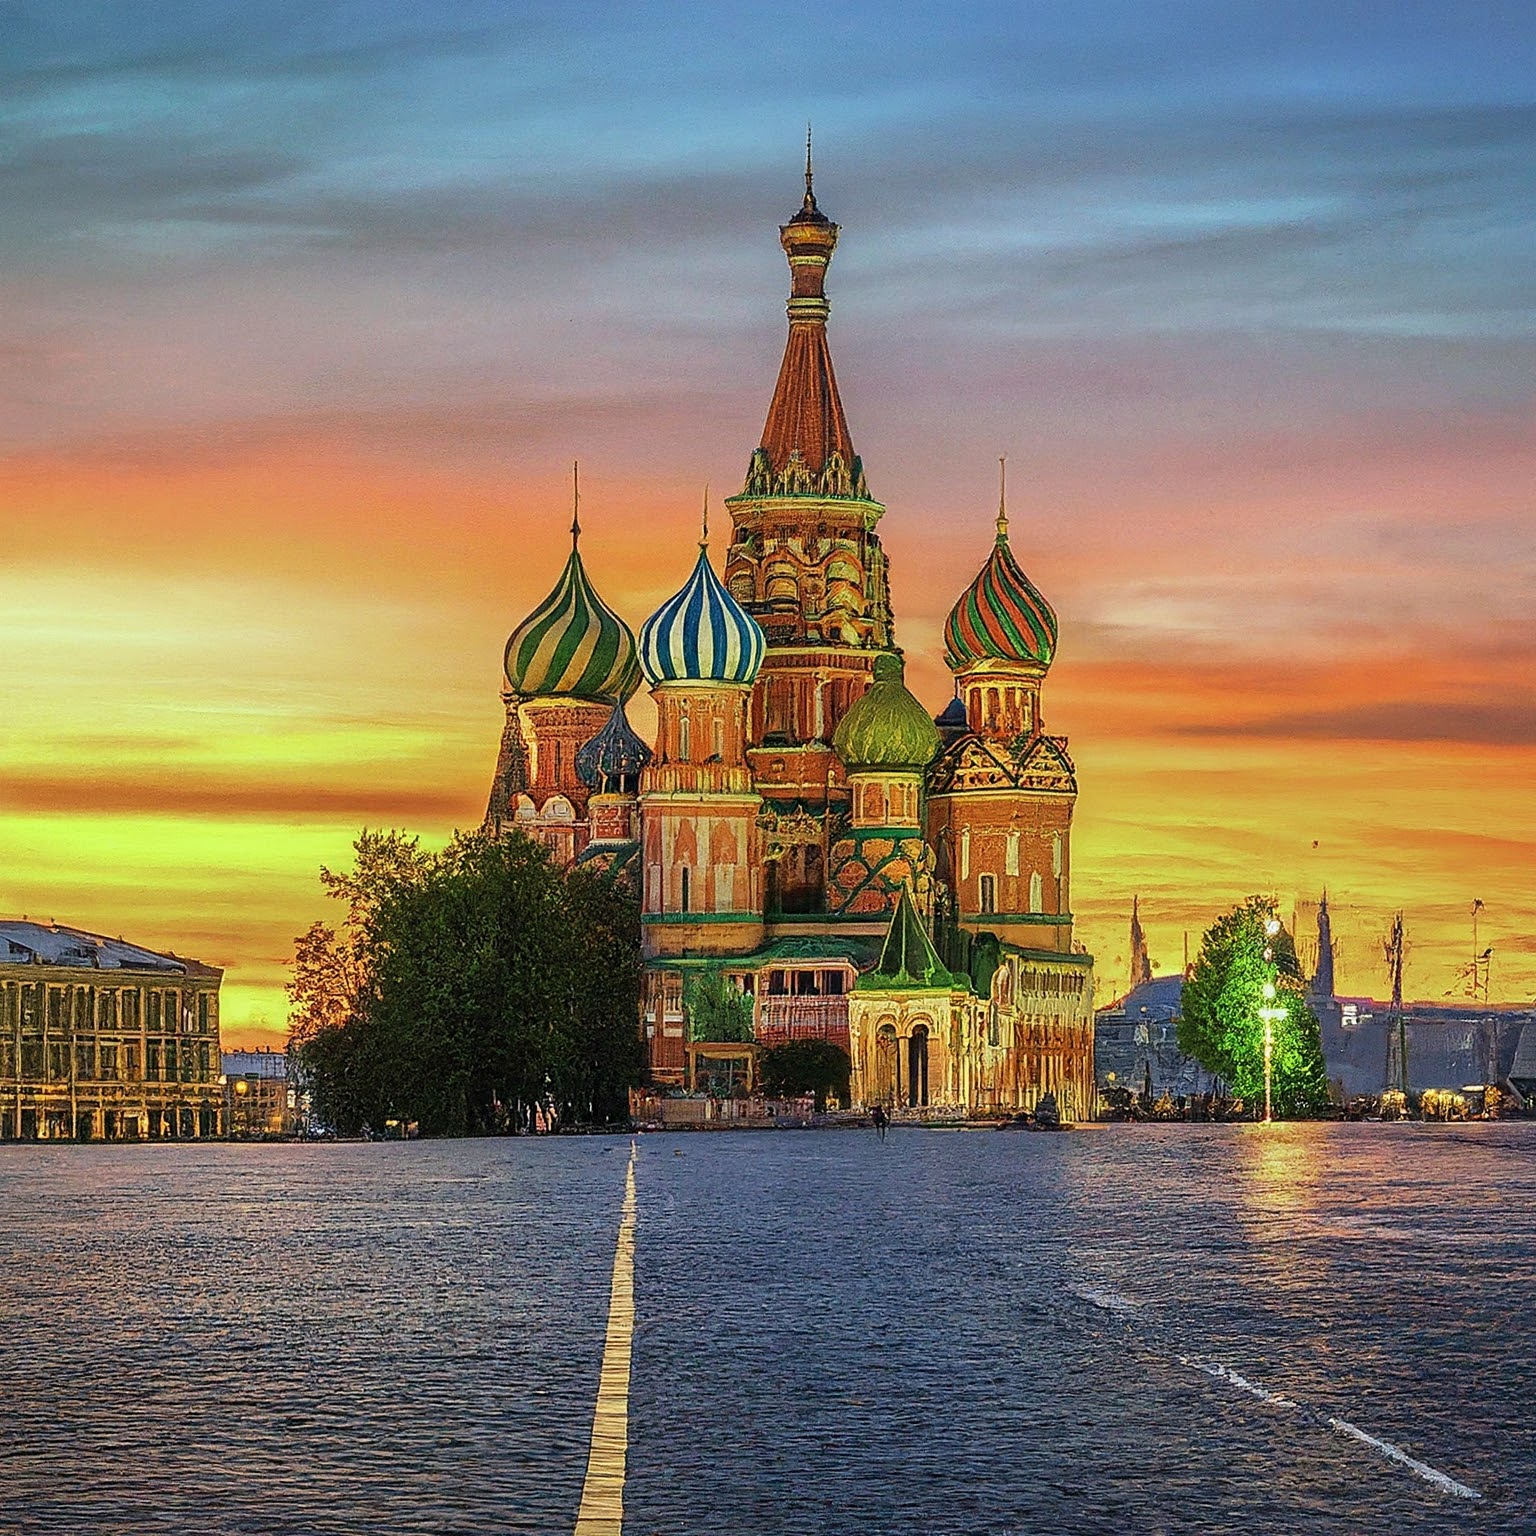 Photorealistic image of Saint Basil's Cathedral in Russia, featuring its colorful onion domes and ornate decorations.